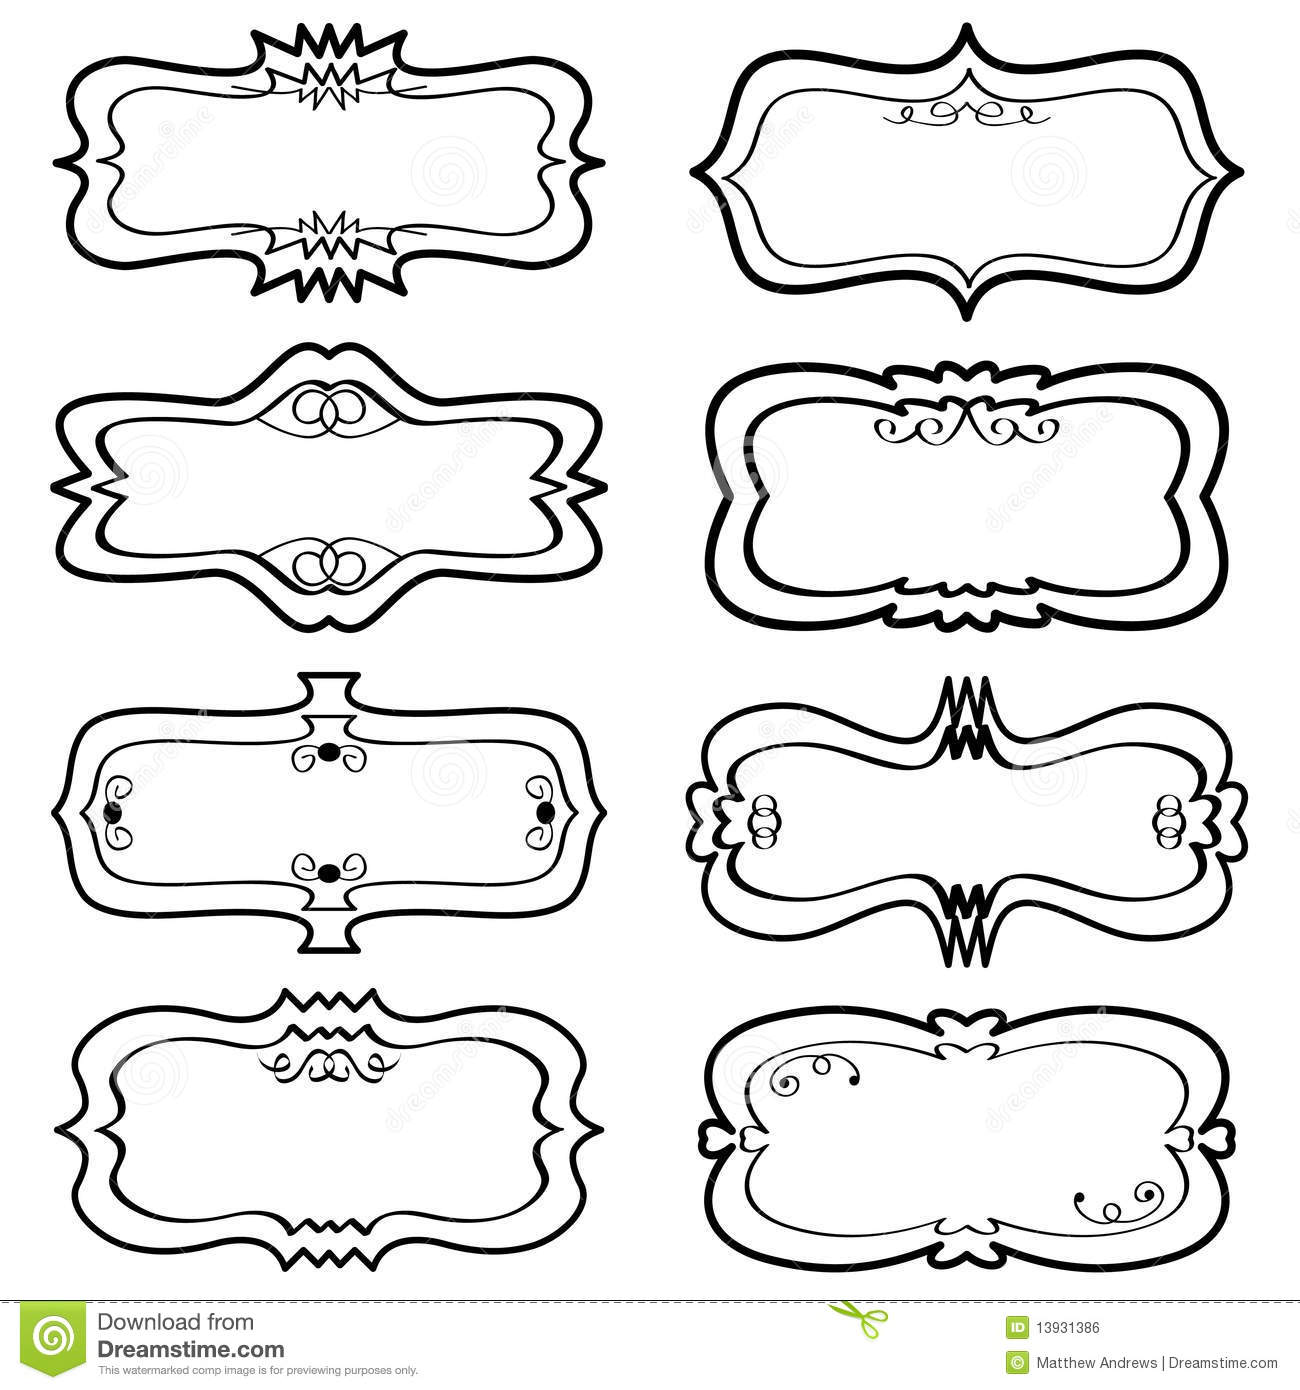 4-best-images-of-black-and-white-printable-label-templates-free-black-and-white-blank-label